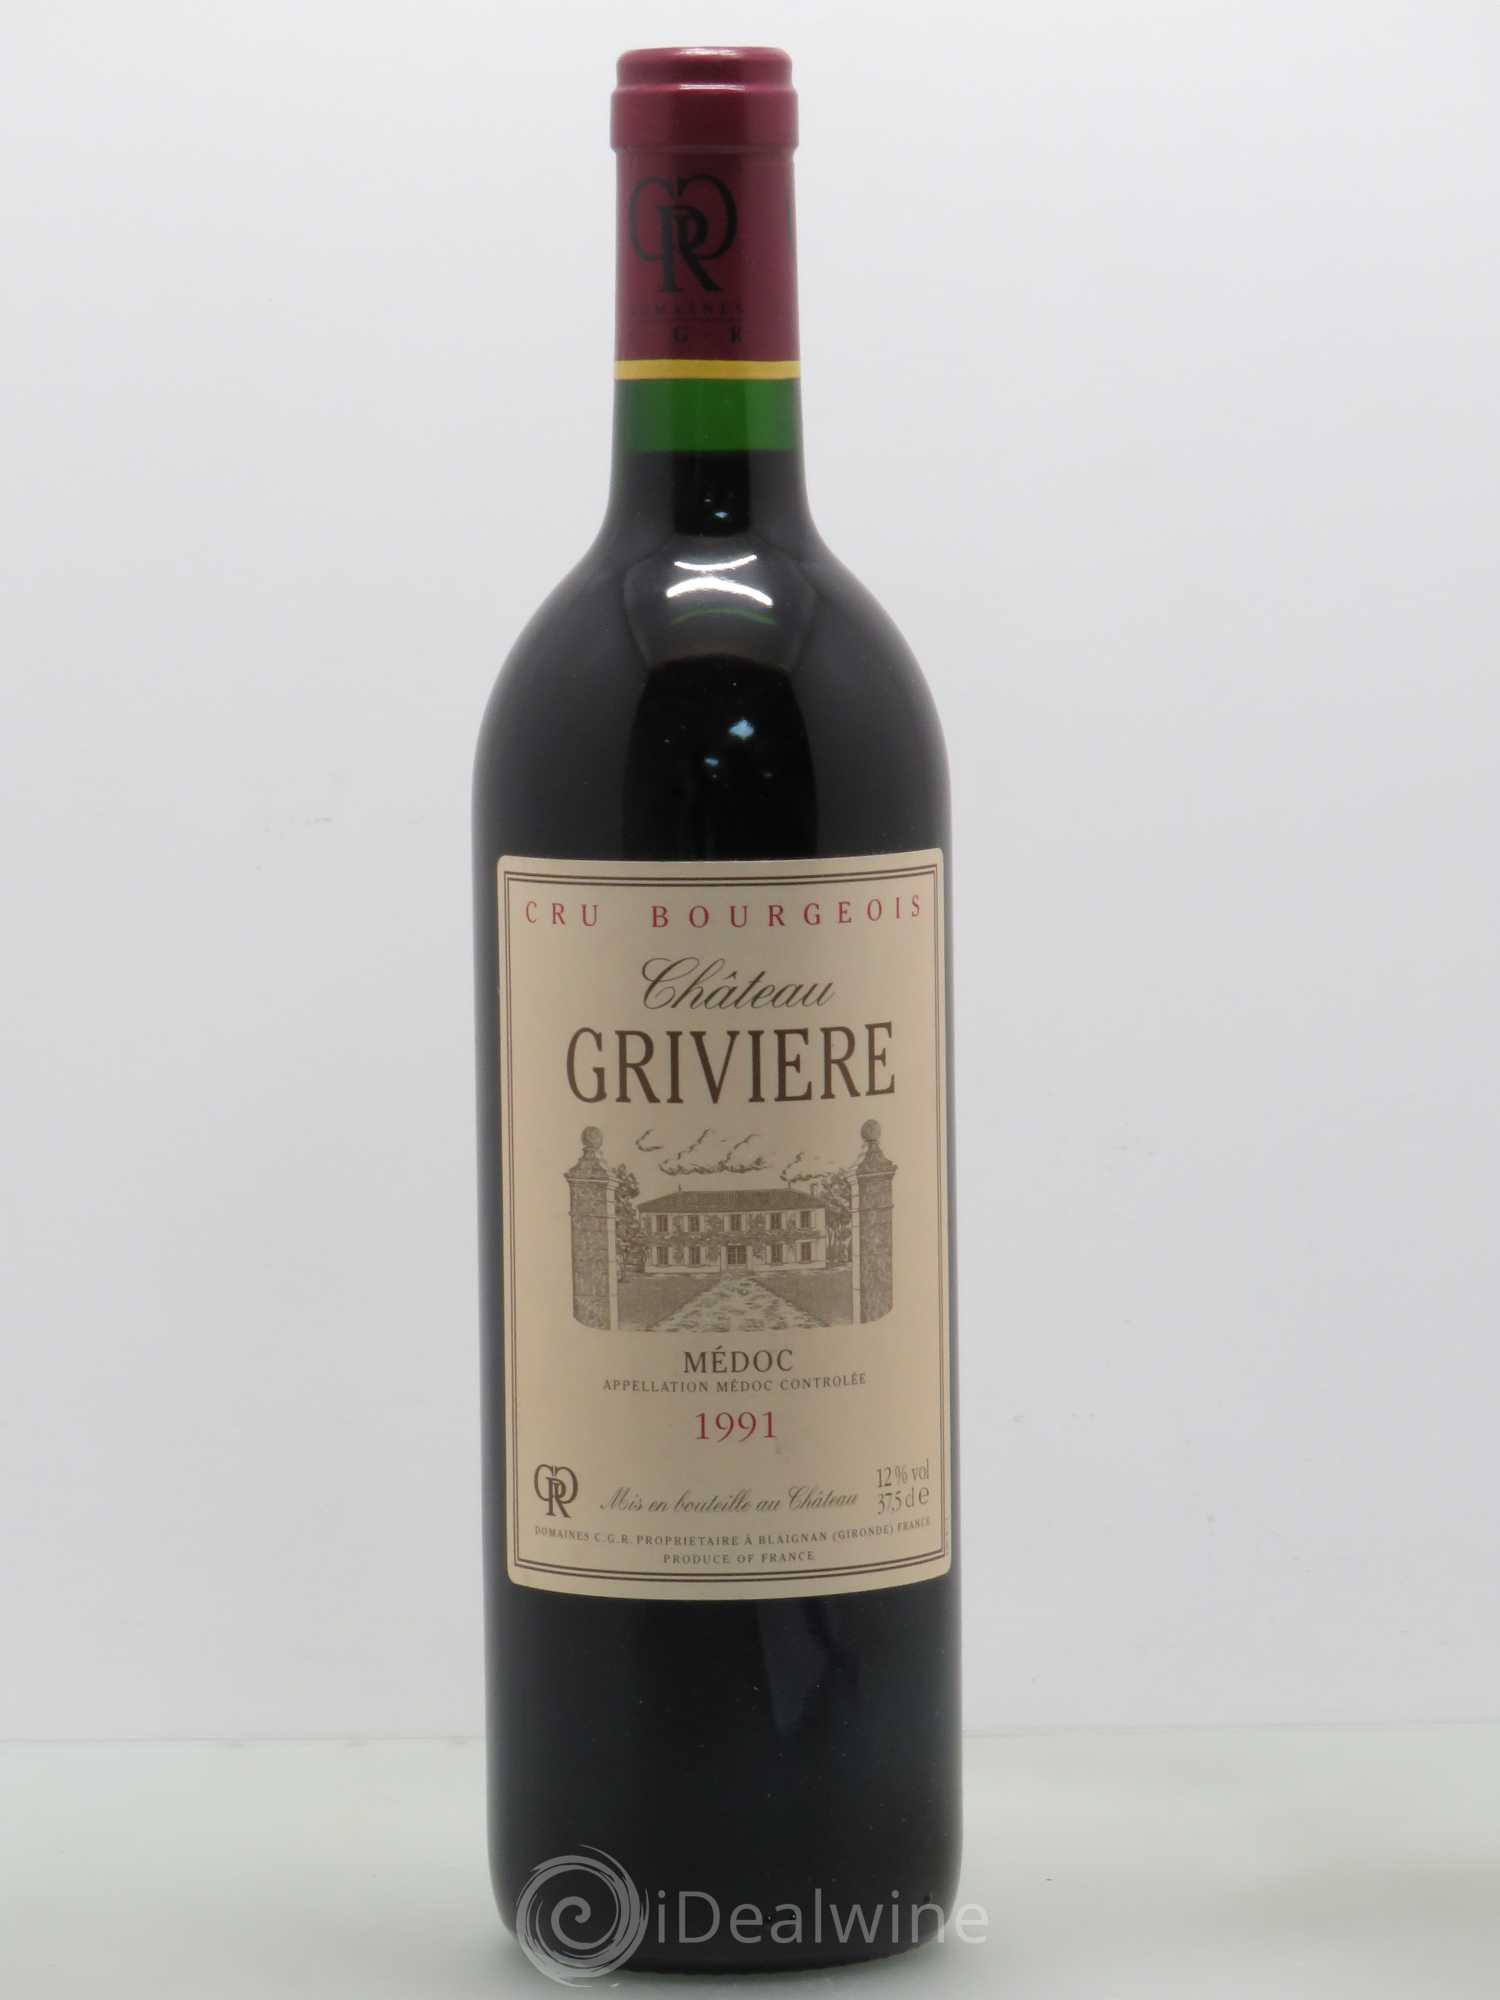 Chateau griviere 2018